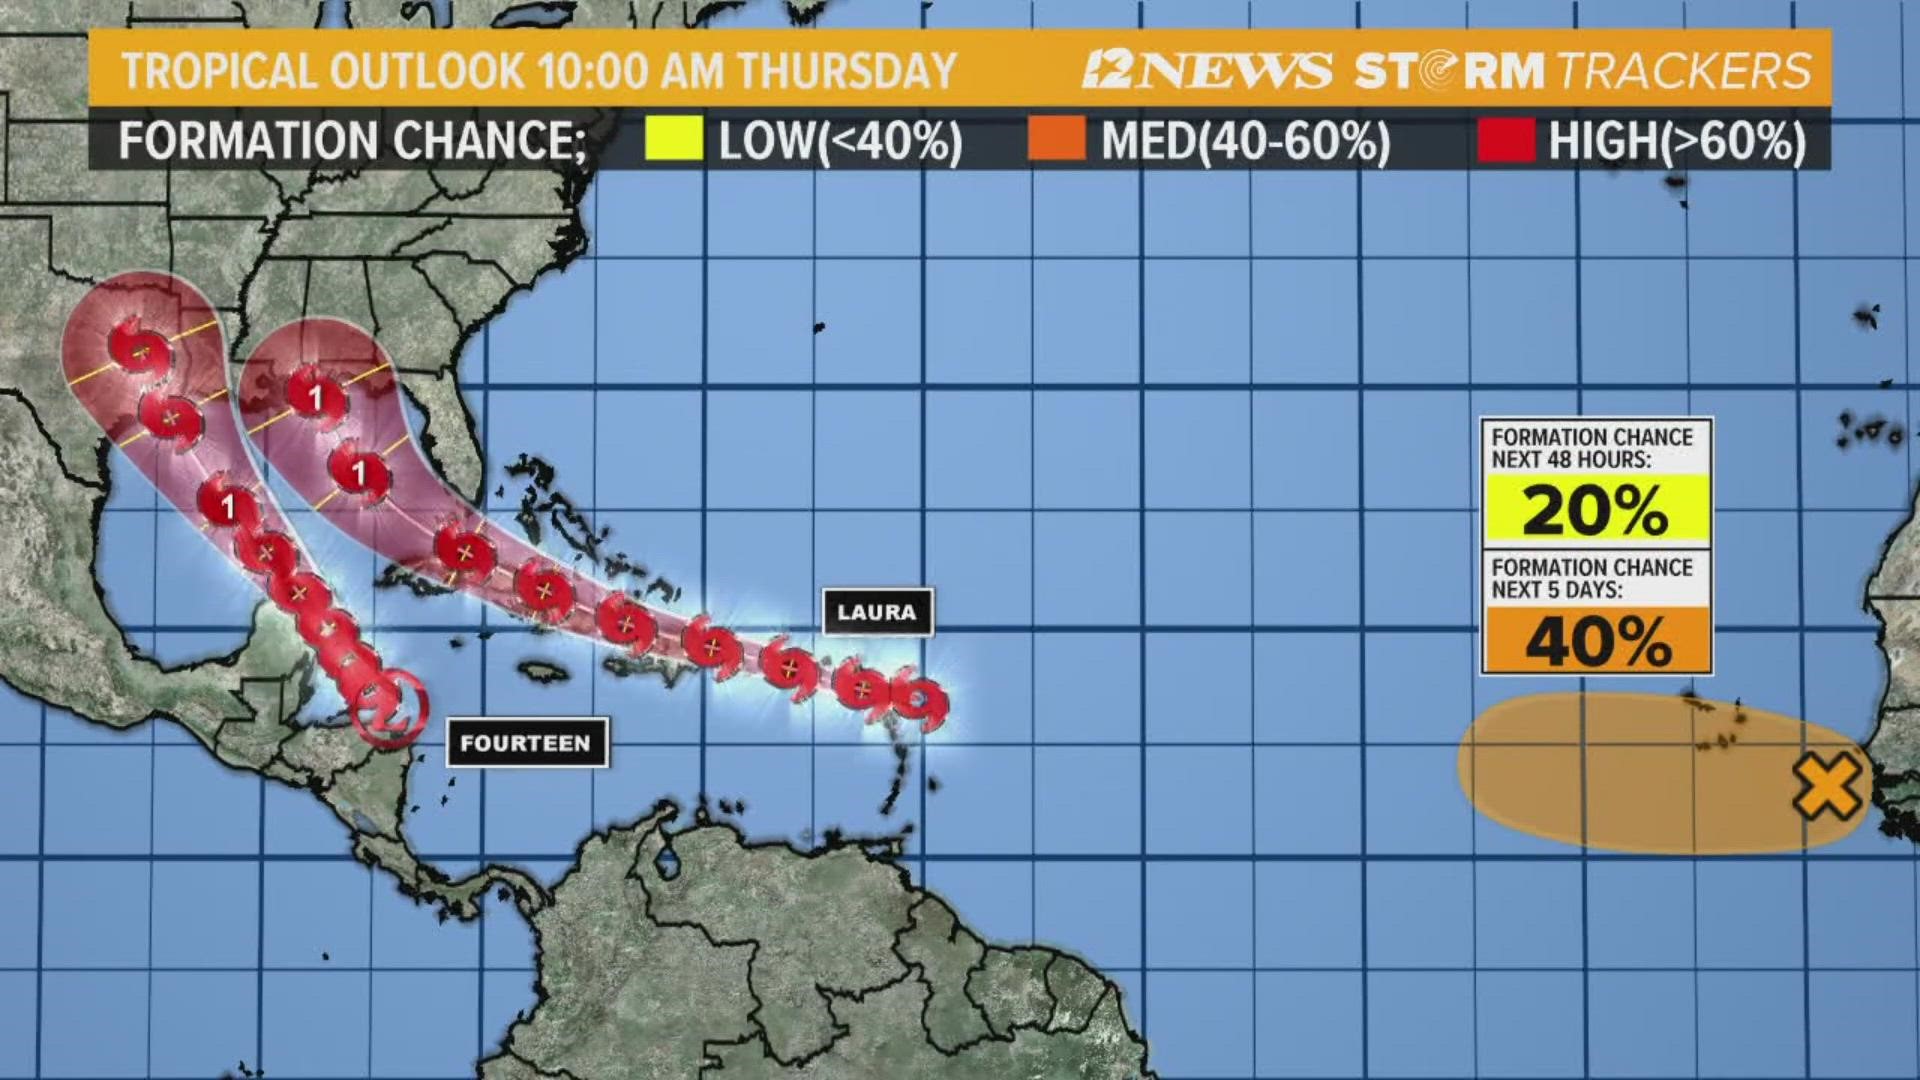 Just after 8 a.m. Friday, the National Hurricane Center announced that Tropical Storm Laura had formed. When TD 14 becomes a storm, as forecast, it will be "Marco."